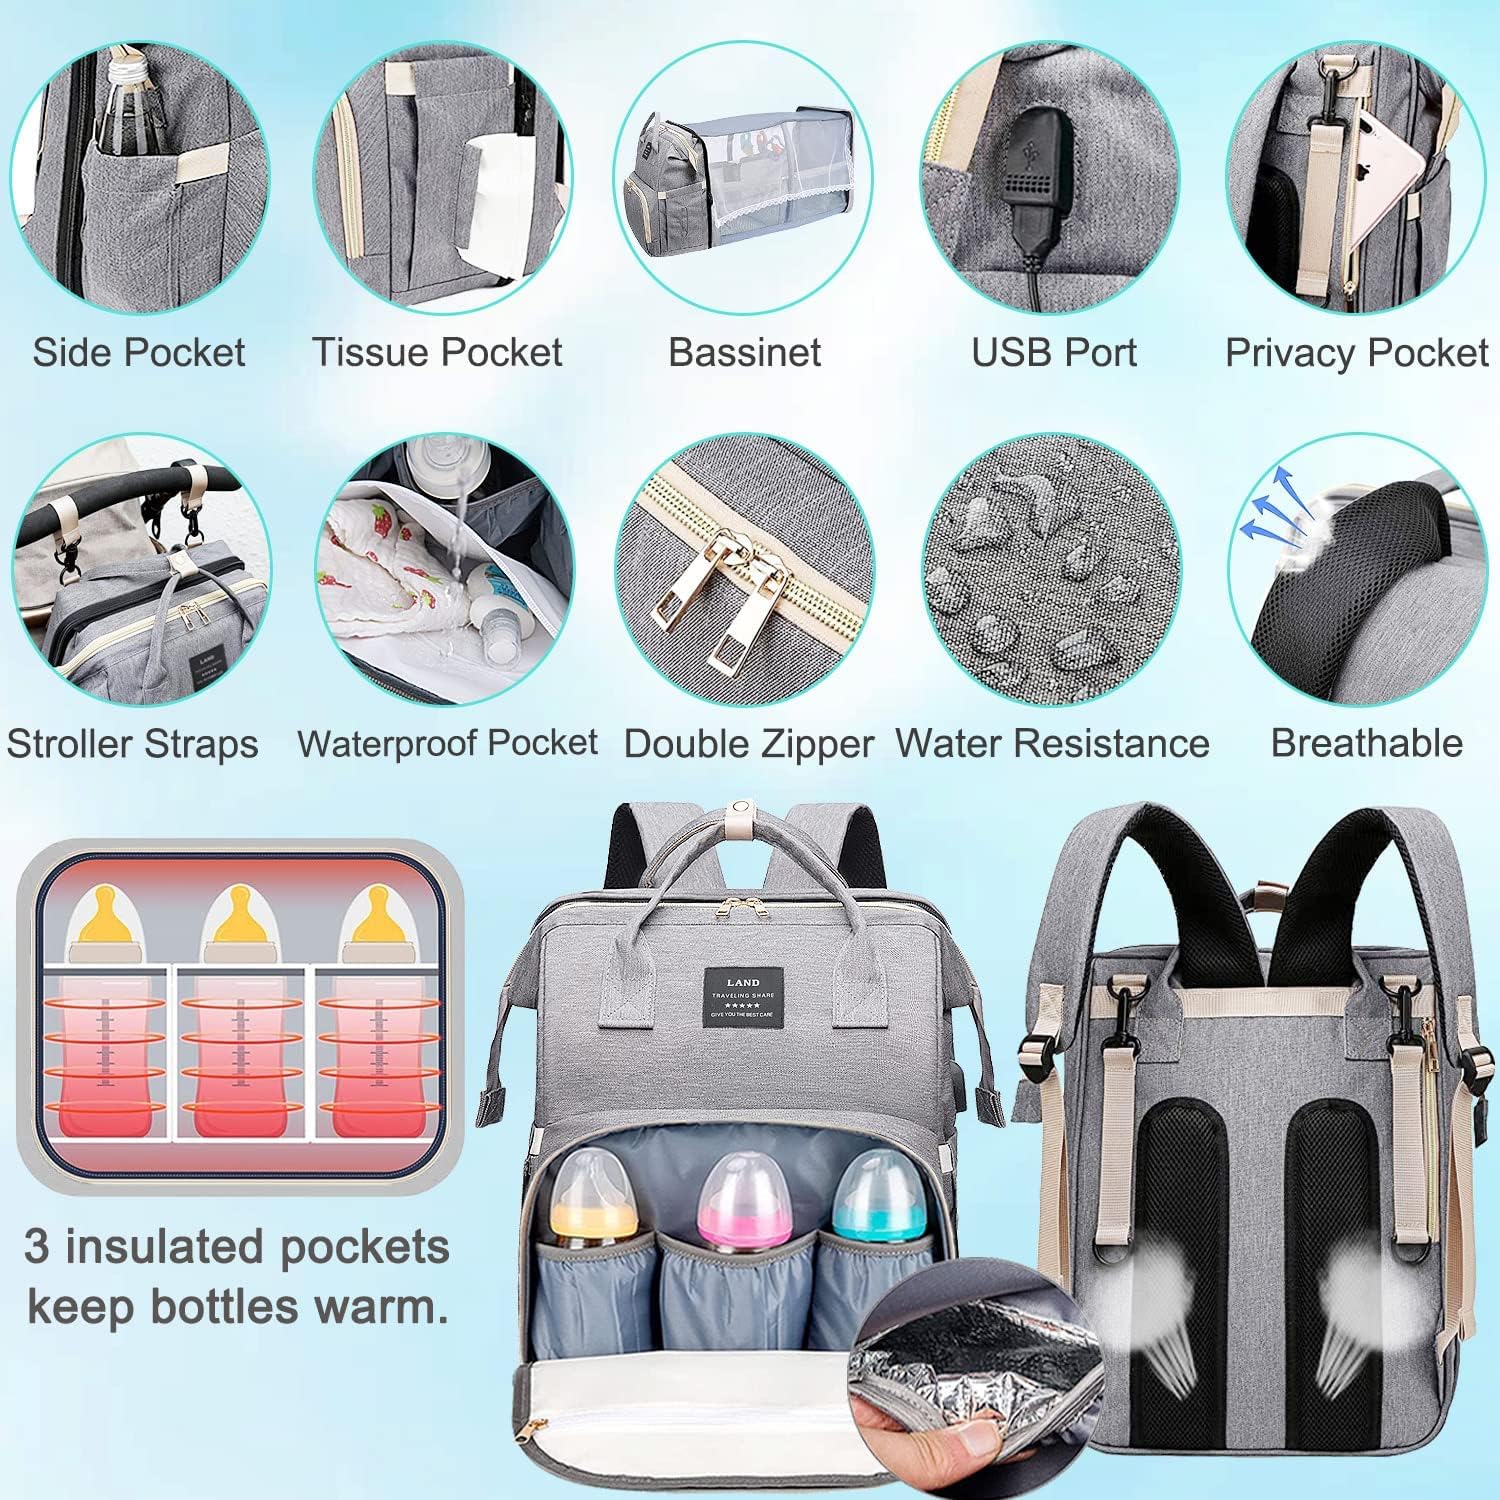 DMG Diaper Bag Backpack, Baby Bag Diaper Bag with Changing Station & Toy Bar, Baby Girl Boy Diaper Bag for Dad Mom Travel Baby Shower Gifts, Large Capacity, 900d Oxford, USB Port, 3 Toys, Grey